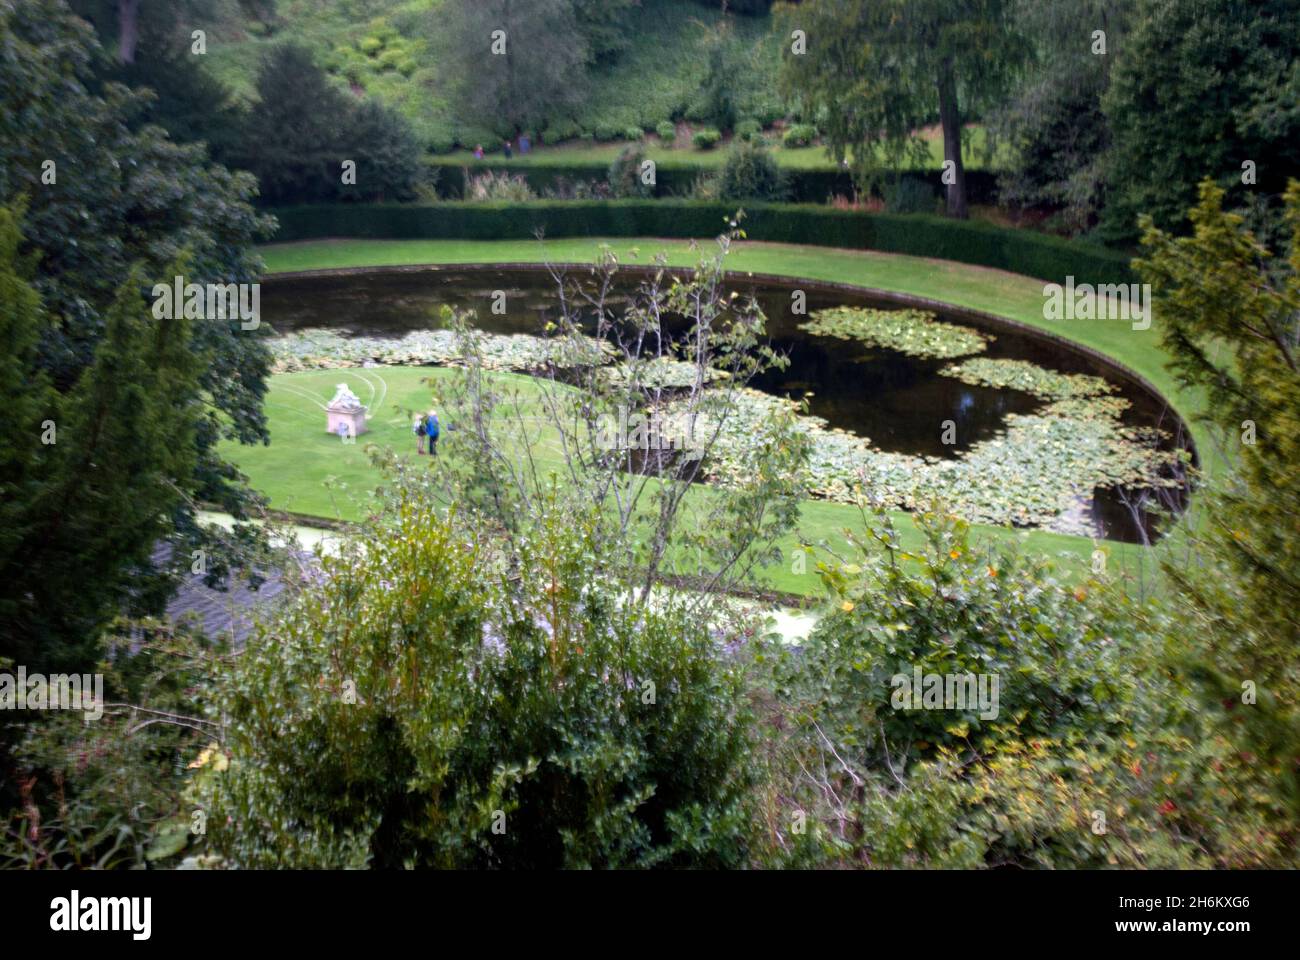 Moon pond from High Ride Path Studley Royal Water Garden, Studley Royal Park, Fountains Abbey, Aldfield, near Ripon, North Yorkshire, England Stockfoto